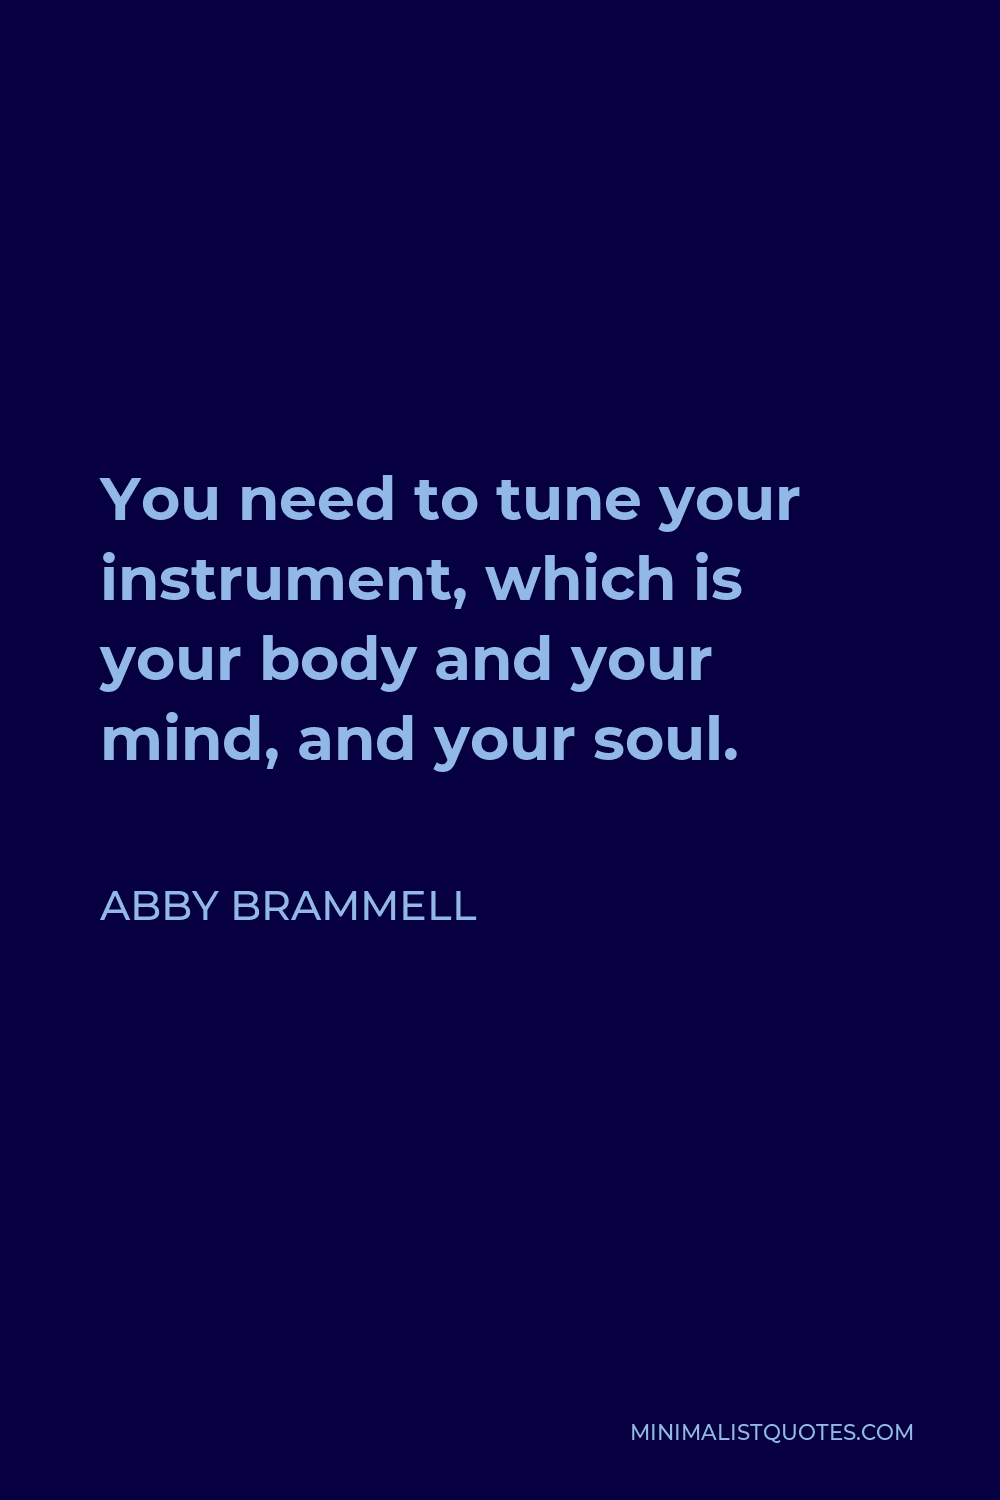 Abby Brammell Quote - You need to tune your instrument, which is your body and your mind, and your soul.